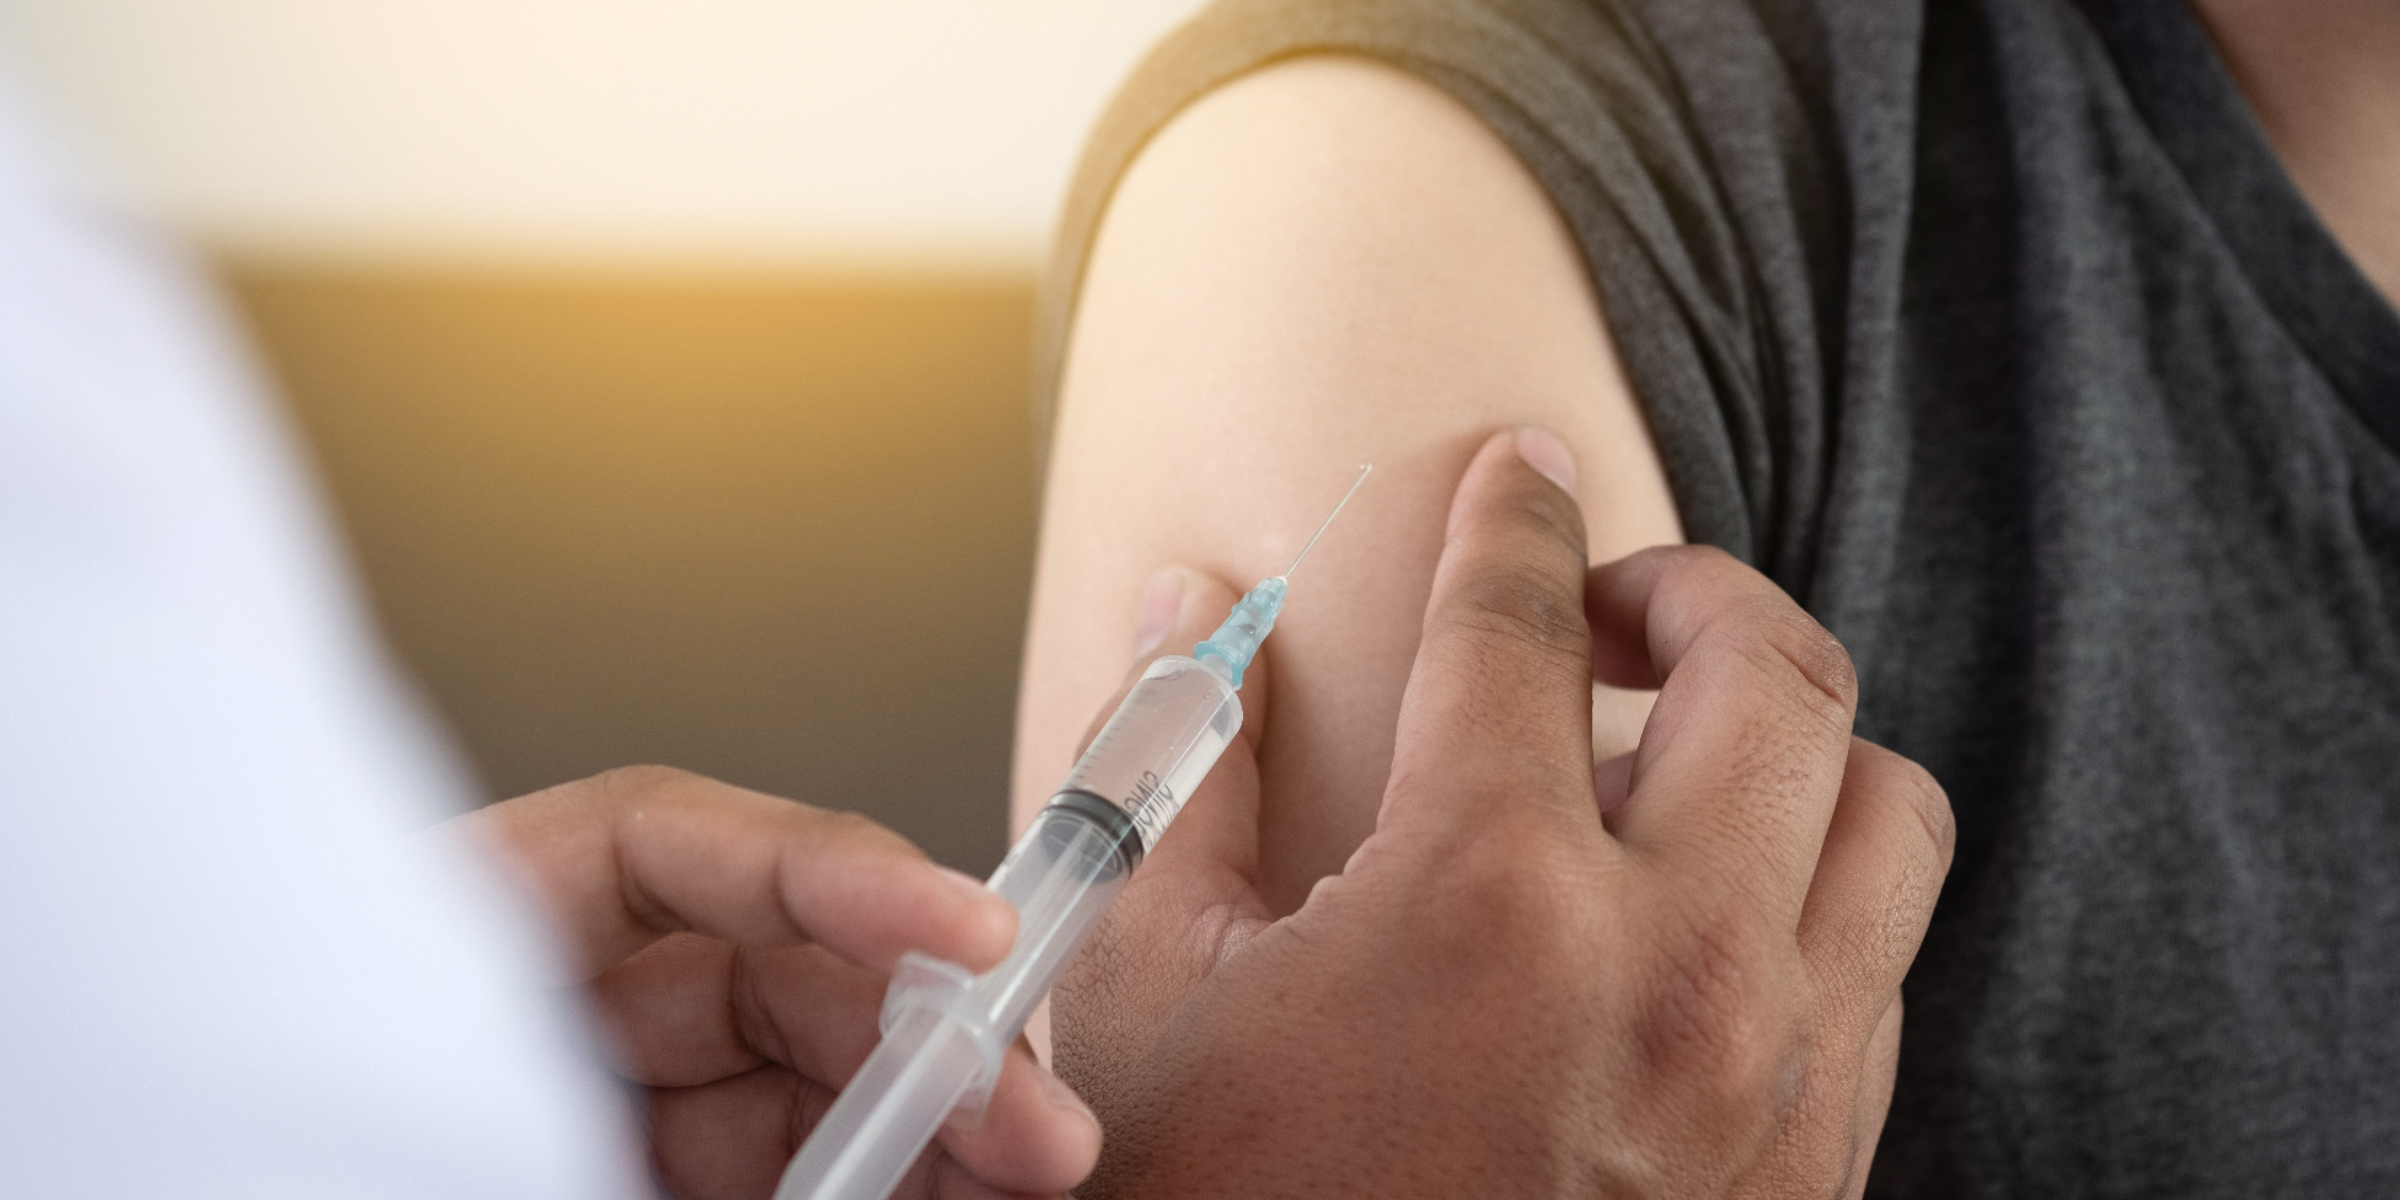 Vaccinations and Immunizations